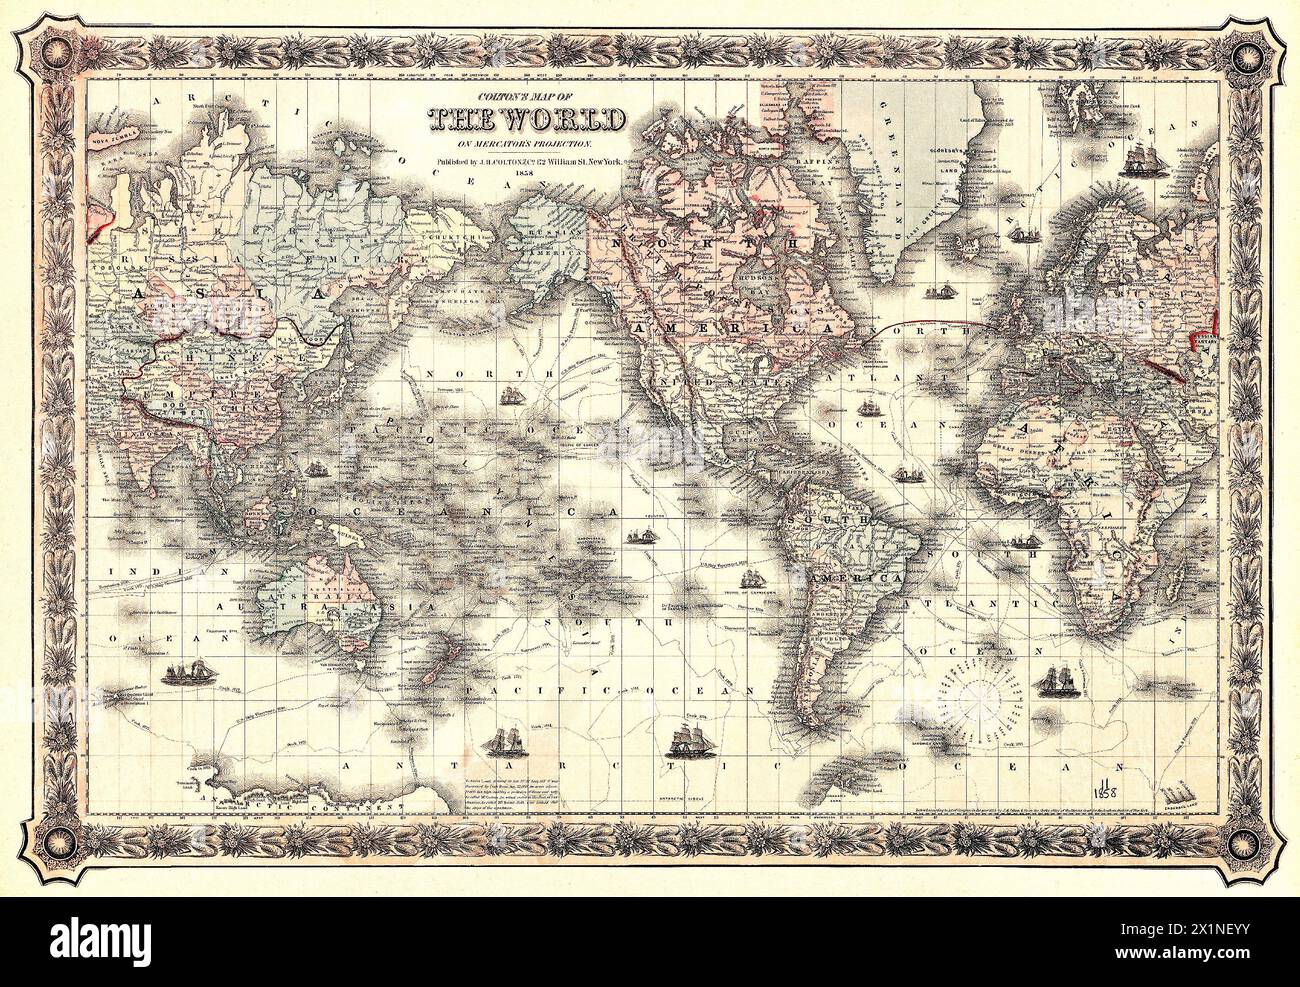 Colton's Map of the World on Mercator's Projection (1858) von J.H. Colton & Co. Original aus der Beinecke Rare Book & Manuscript Library. Stockfoto